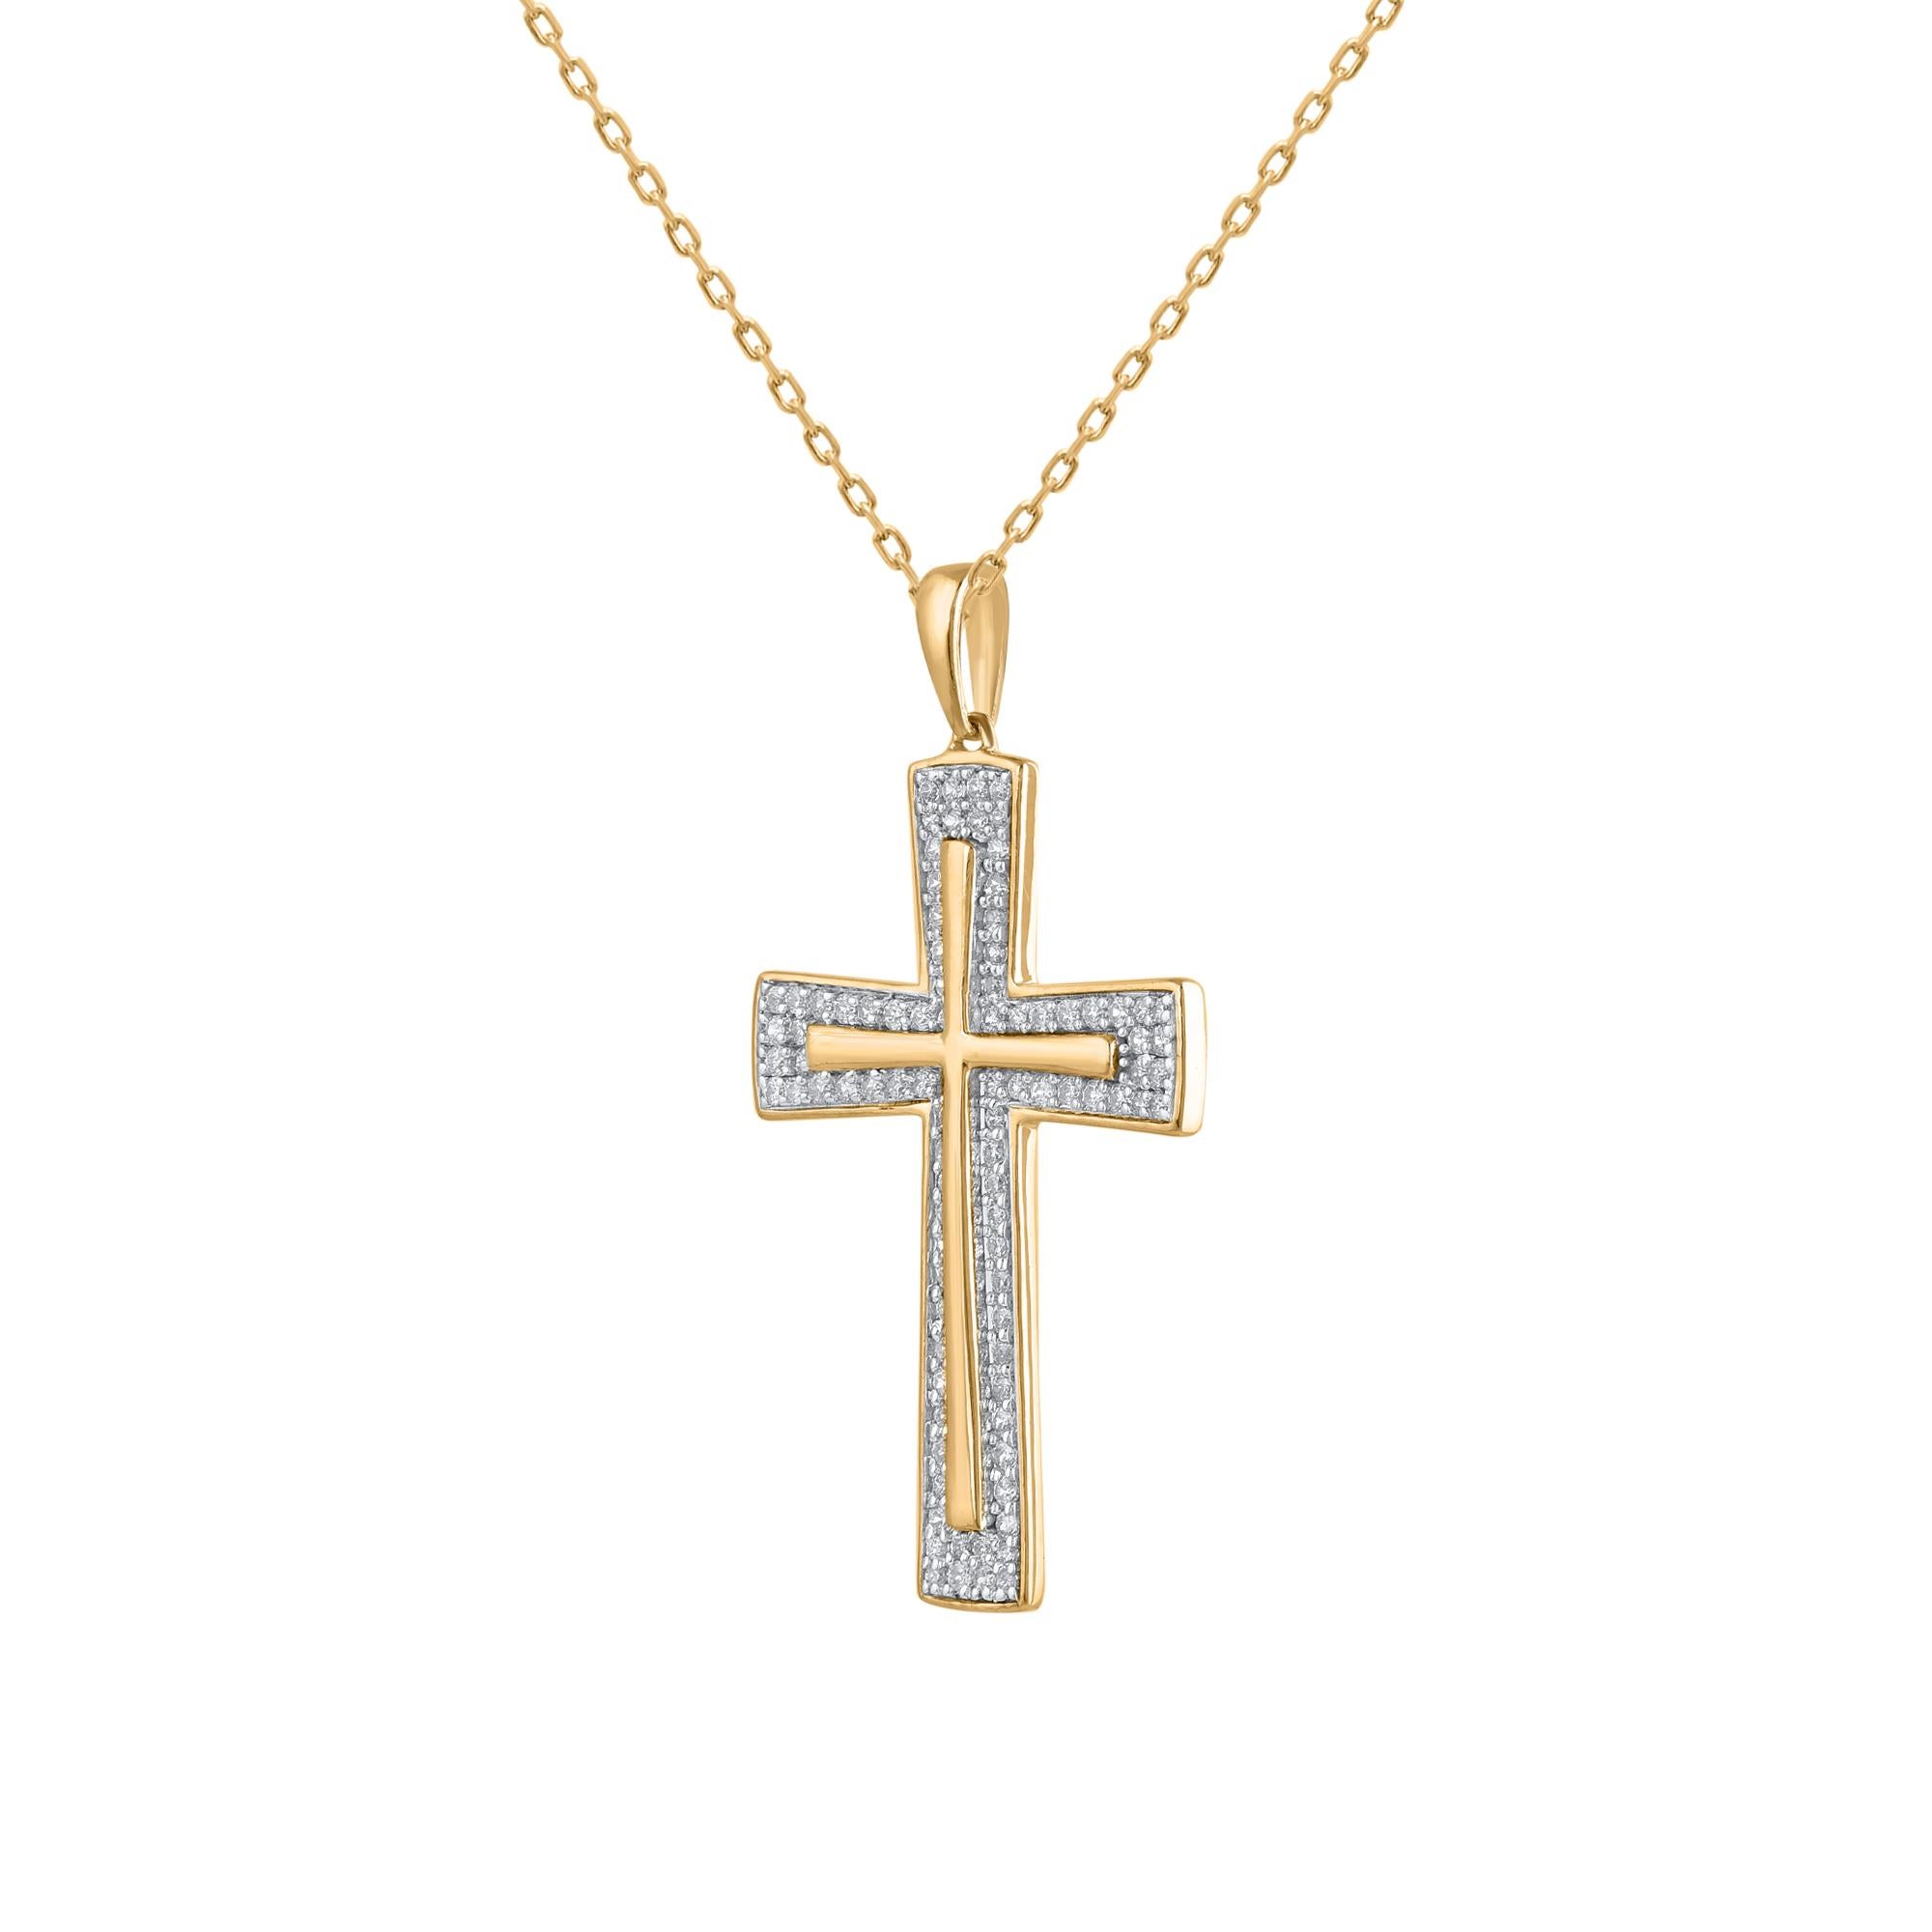 Let your faith shine with this simple and elegant cross pendant. Beautifully crafted by our inhouse experts in 18 karat yellow gold and embellished with 93 single cut & brilliant cut diamond set in Pave setting. The total diamond weight is 0.50